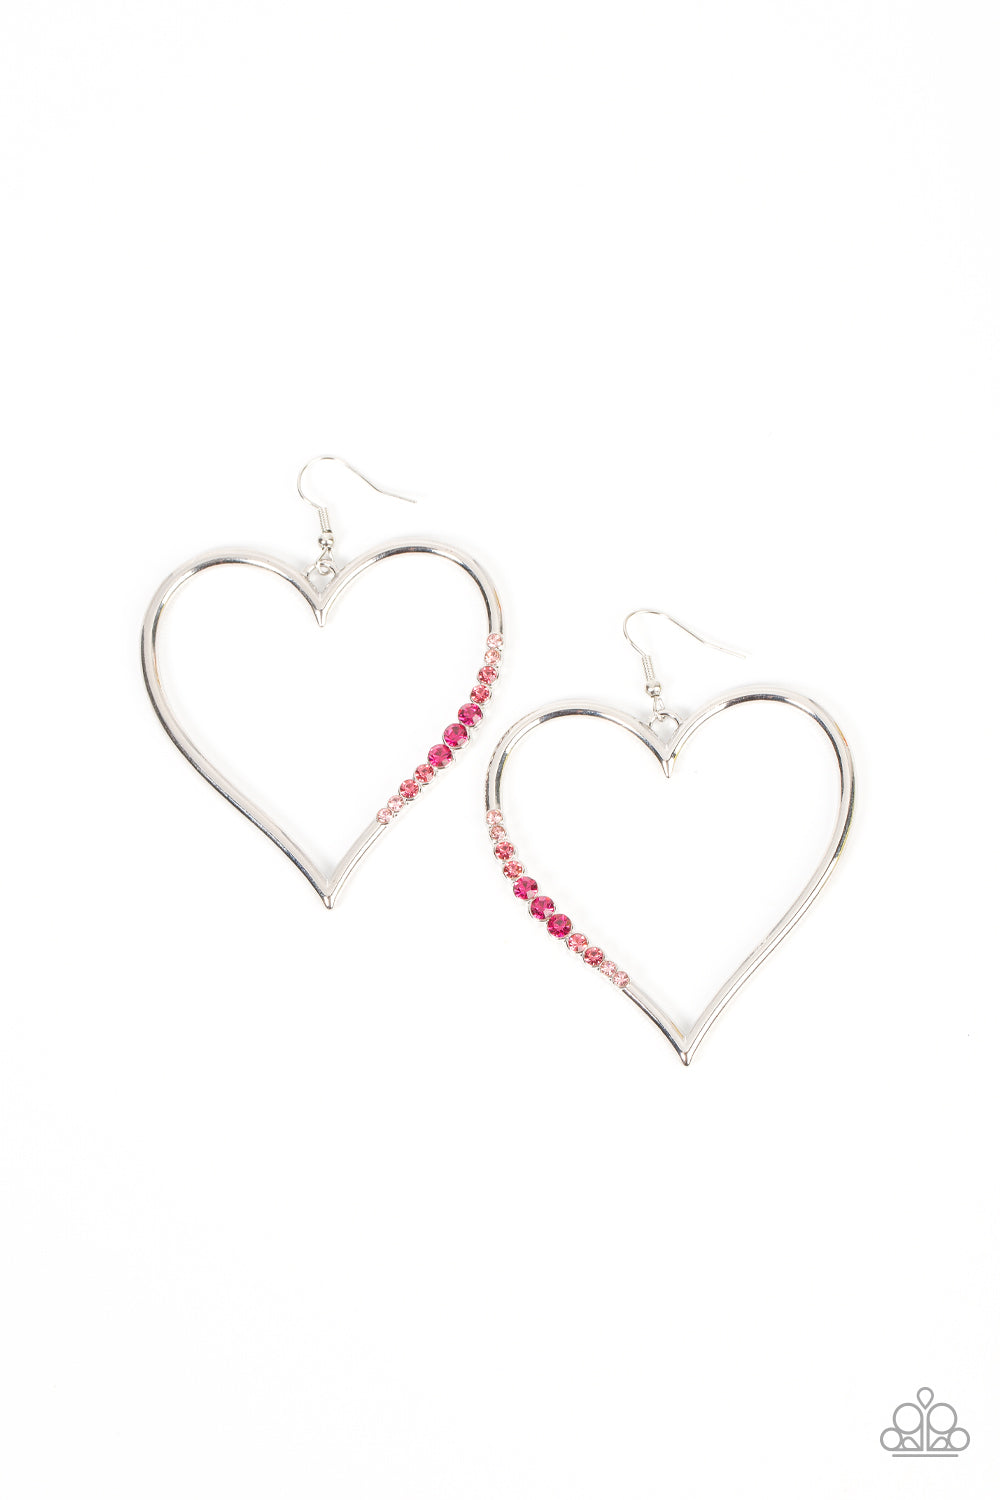 Bewitched Kiss - Multi Earrings